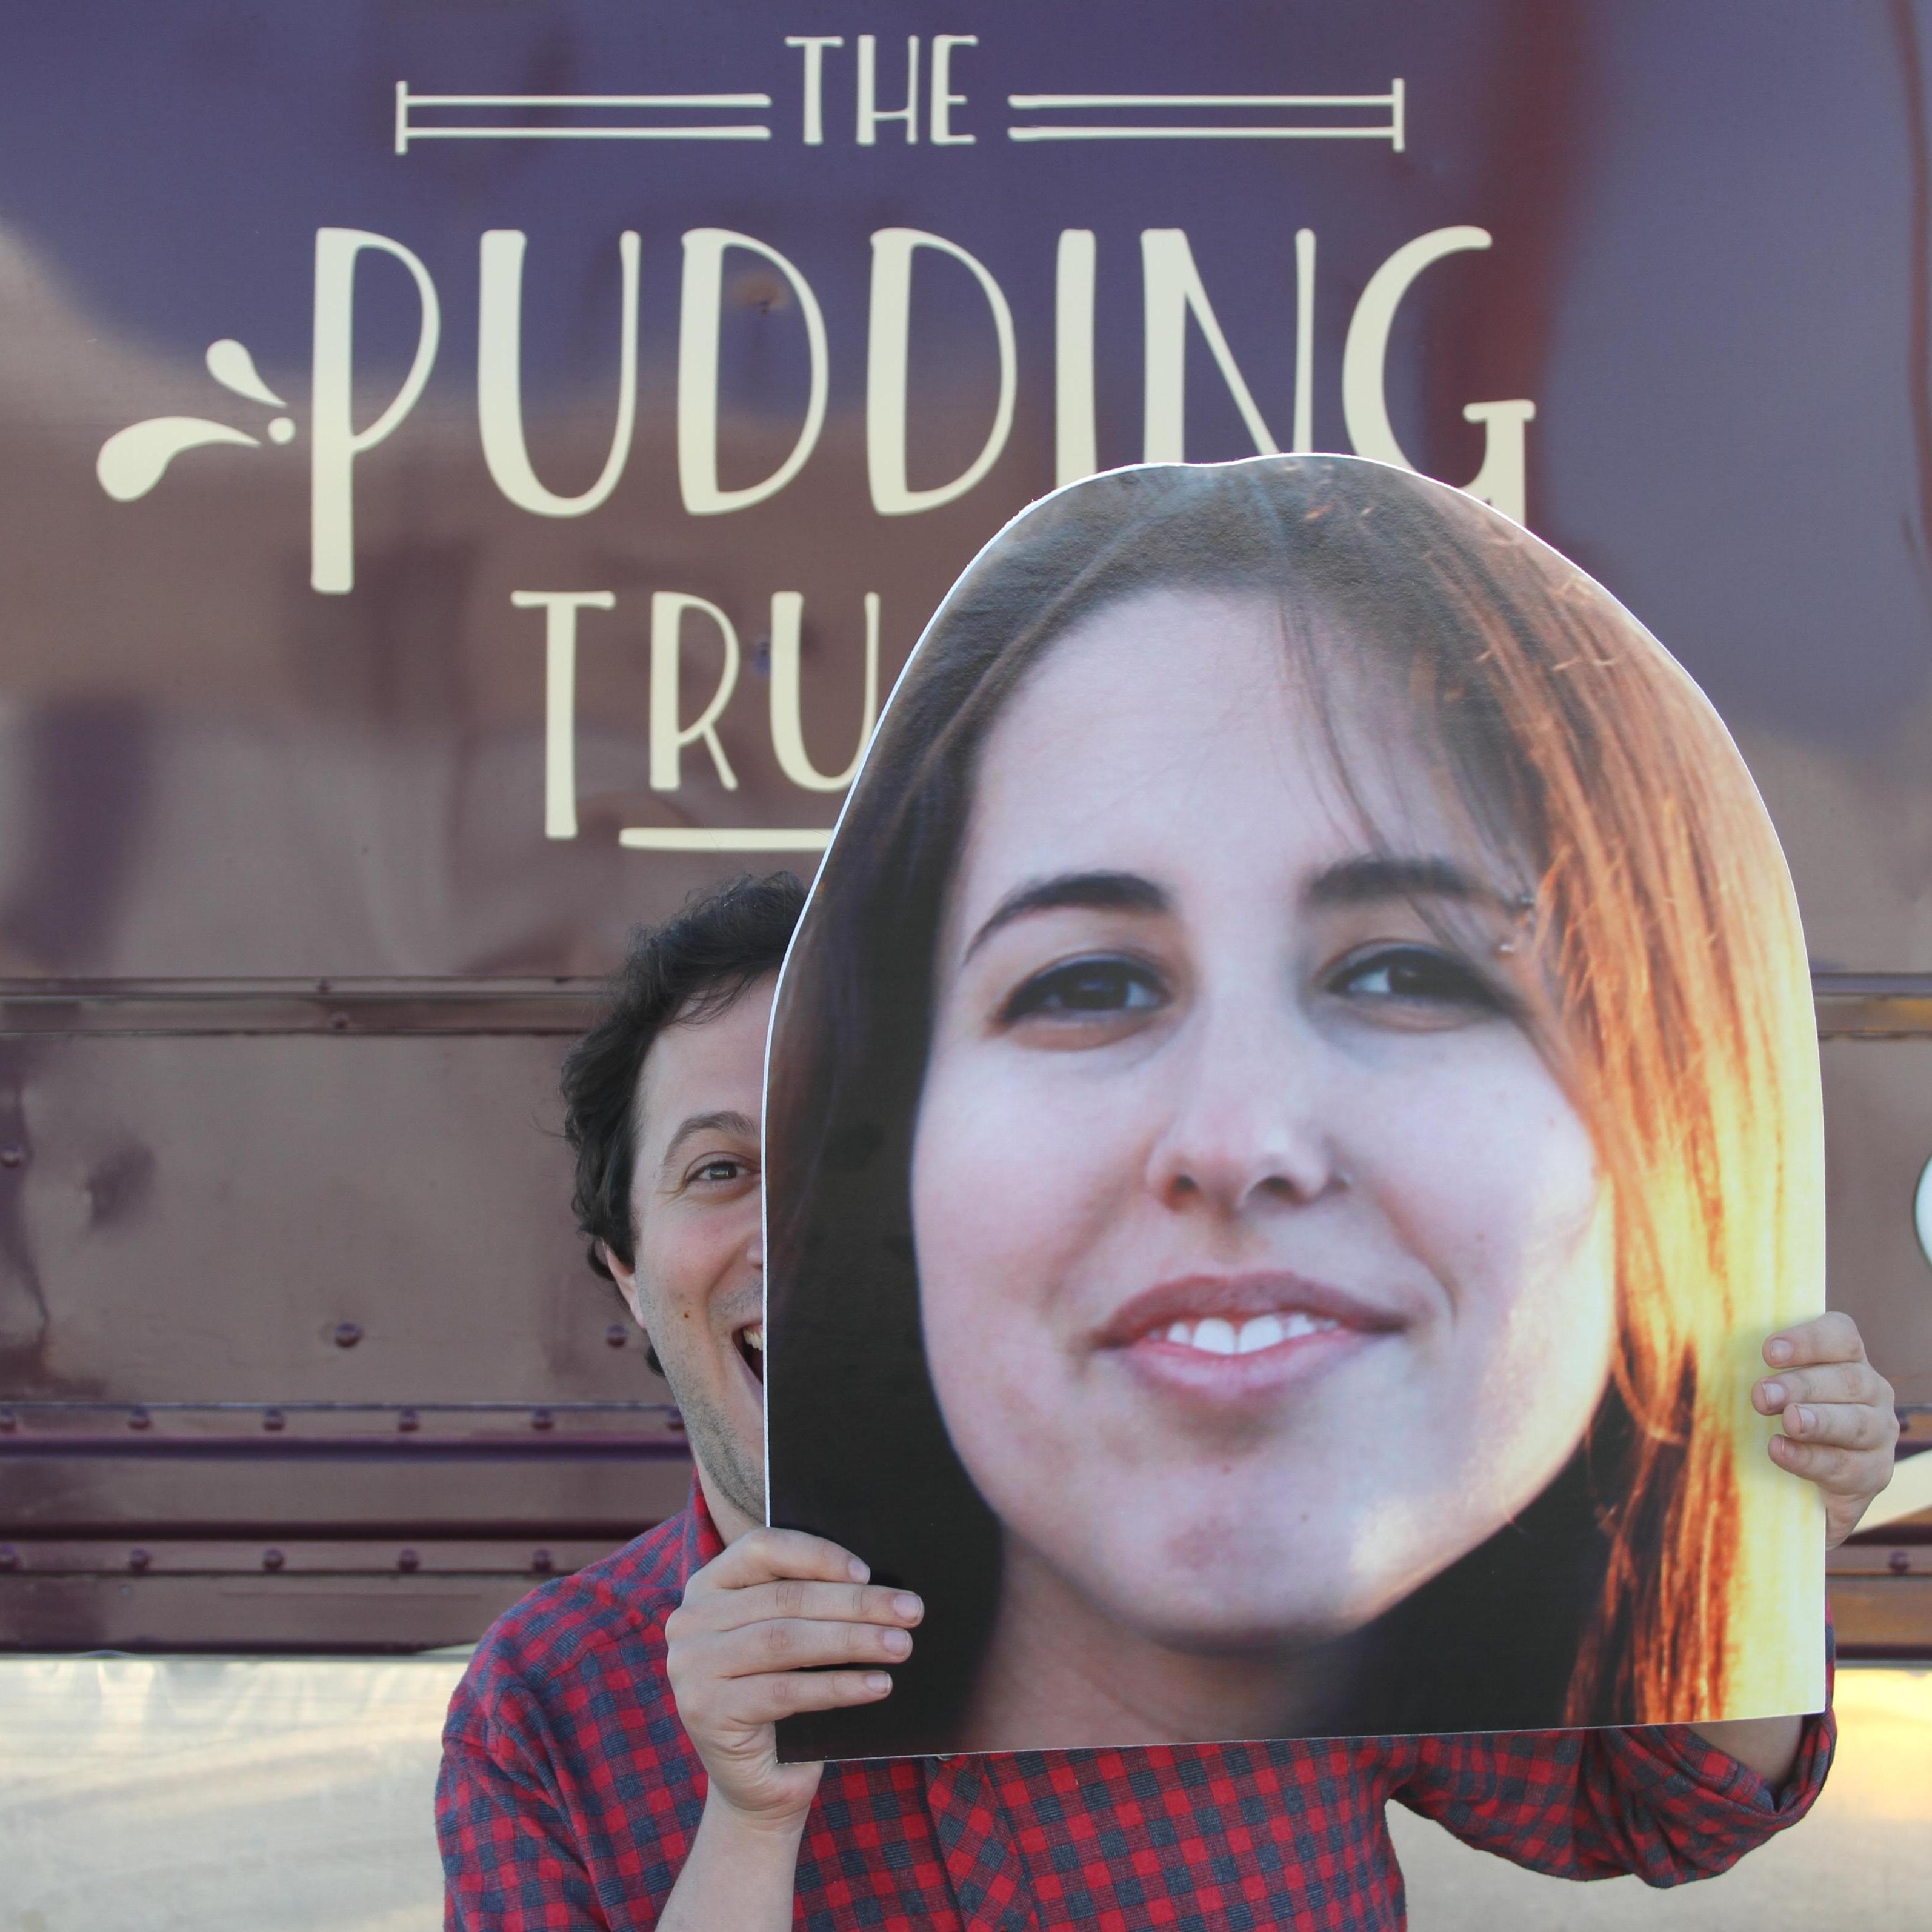 Posing with The Pudding Truck!